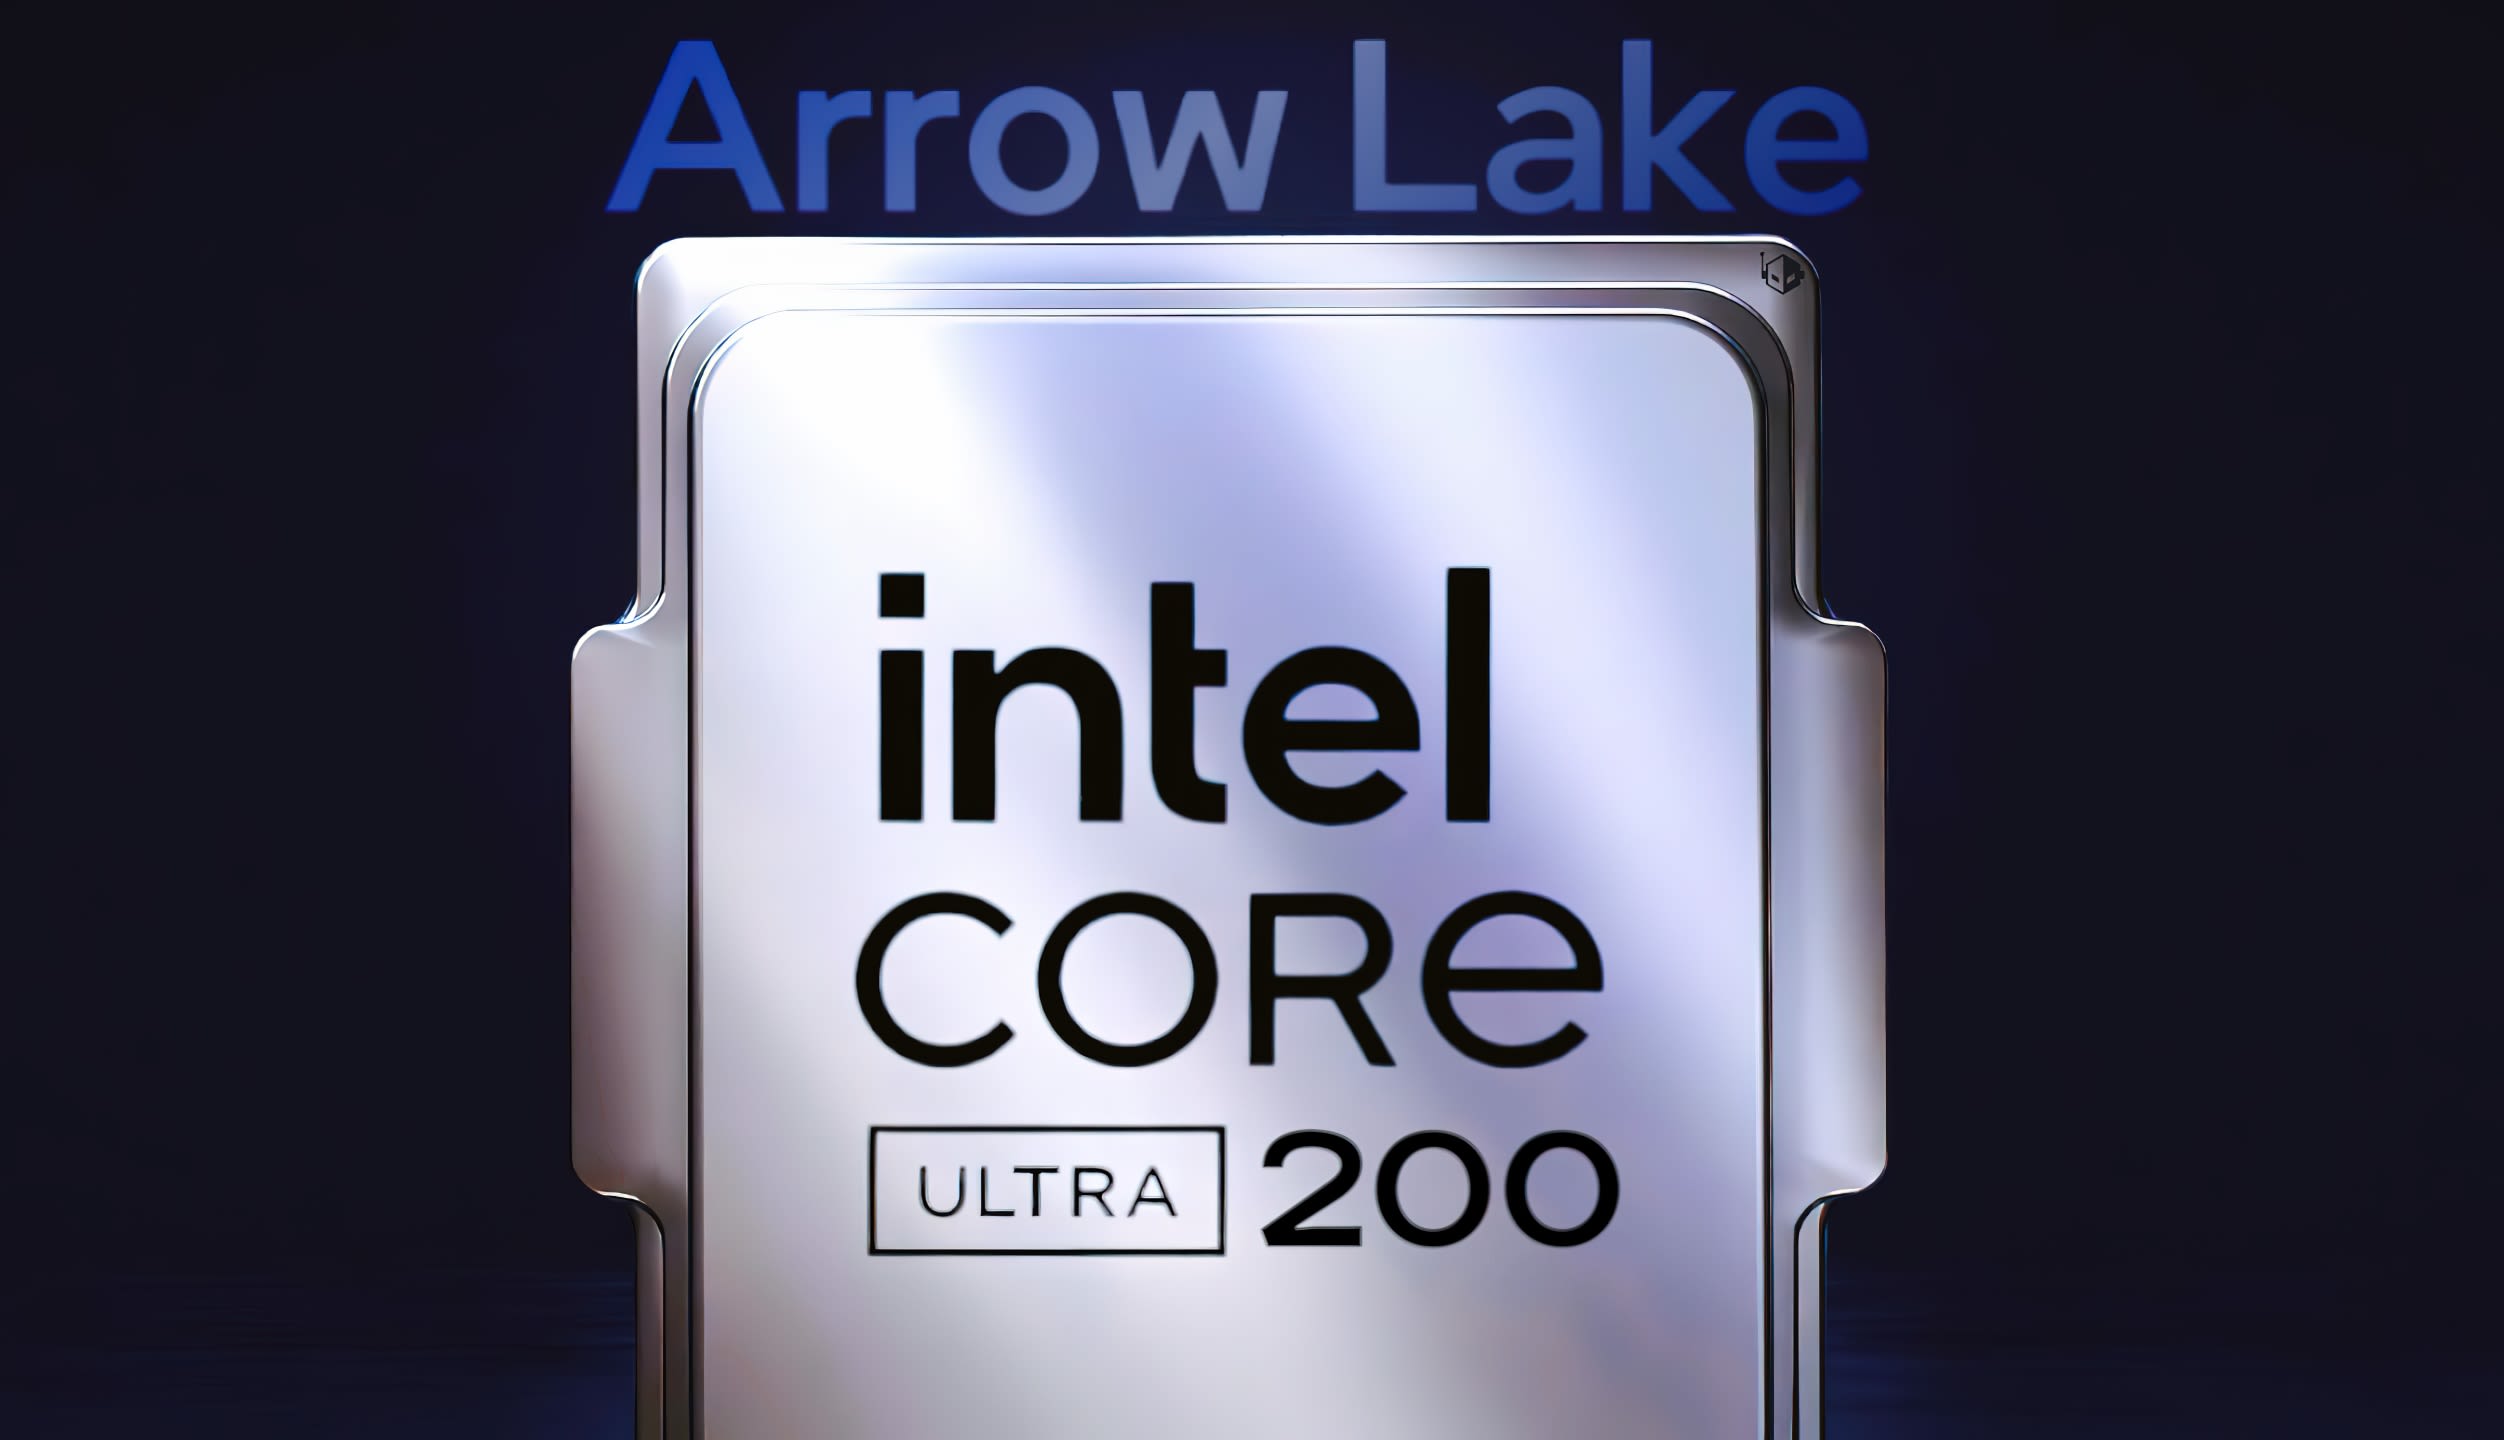 Intel Arrow Lake "Core Ultra 200" Desktop CPU QS Samples Rolling Out As Early As August, October Launch Locked In